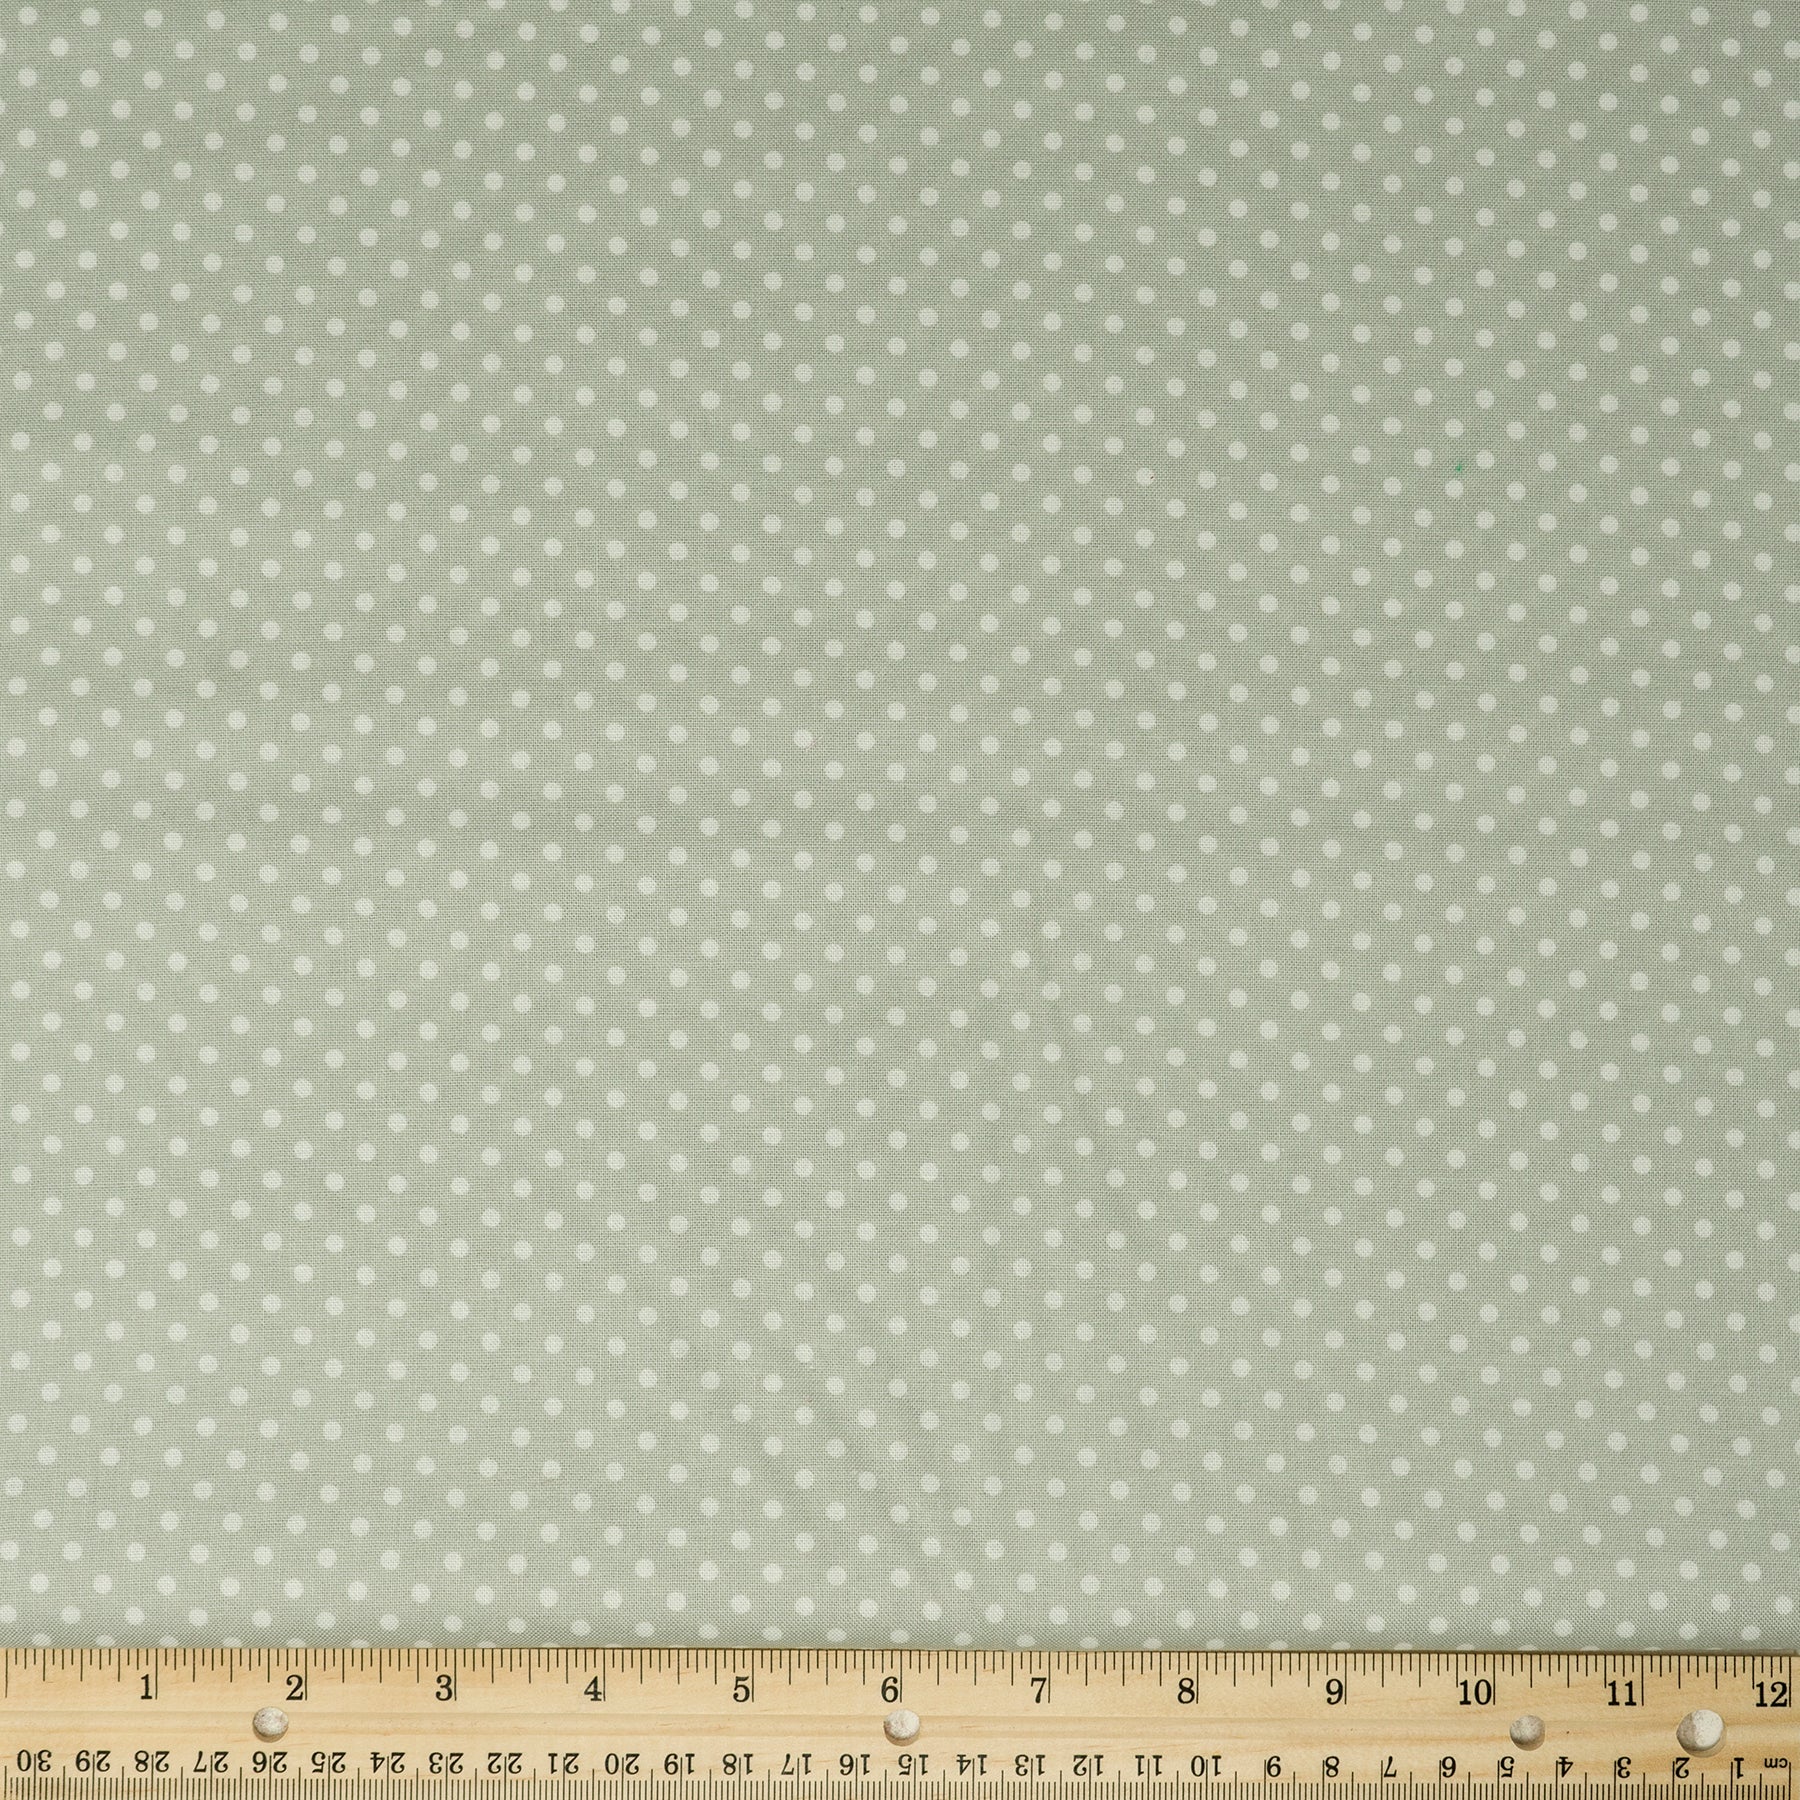 Waverly Inspirations Cotton 44" Medium Dot Dove Color Sewing Fabric by the Yard